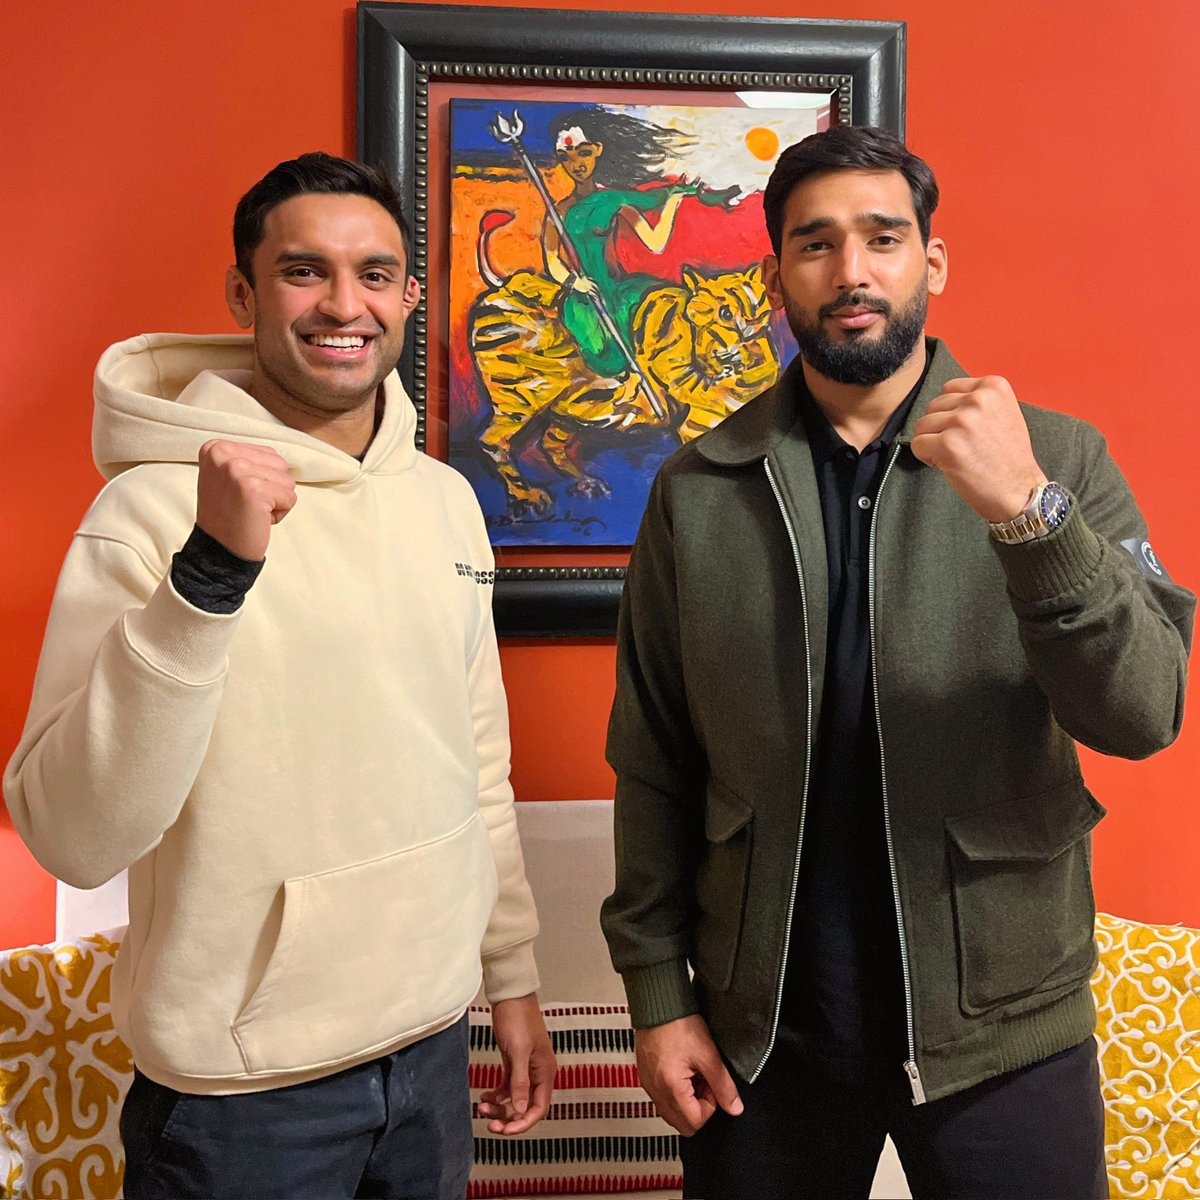 @anshuljubli_ is the first Indian to win a fight in the @ufc 

He's inspired a nation and shown us that we can fight on the biggest stage!

I look forward to growing Indian MMA with him and reviving our martial arts culture 🇮🇳

#MMA #India